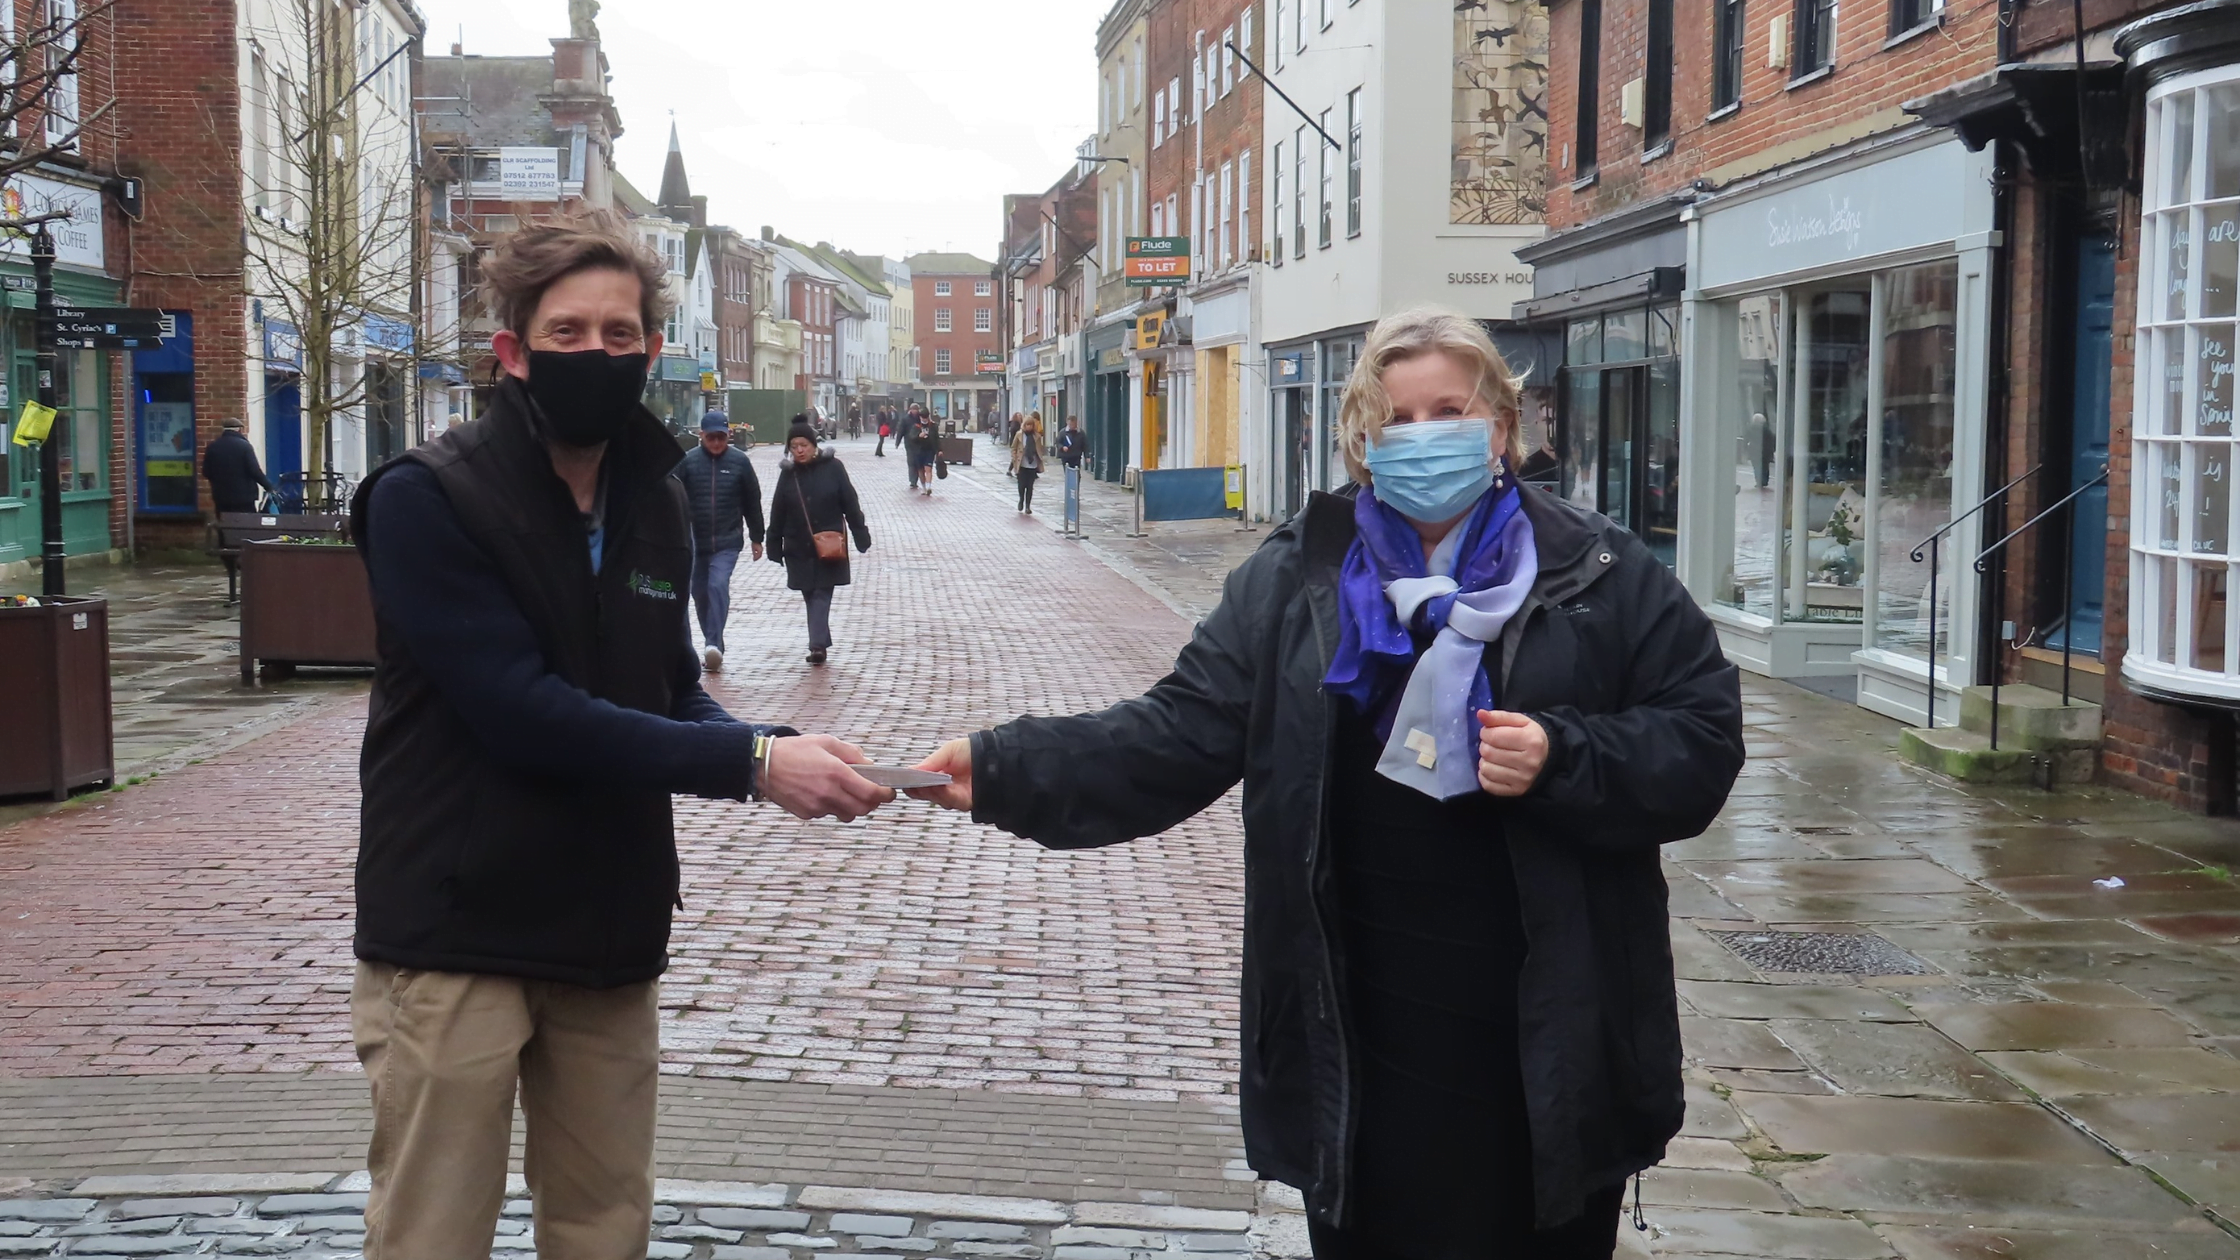 RJS Waste Management's Jon meets Donna from The Four Streets Project in Chichester